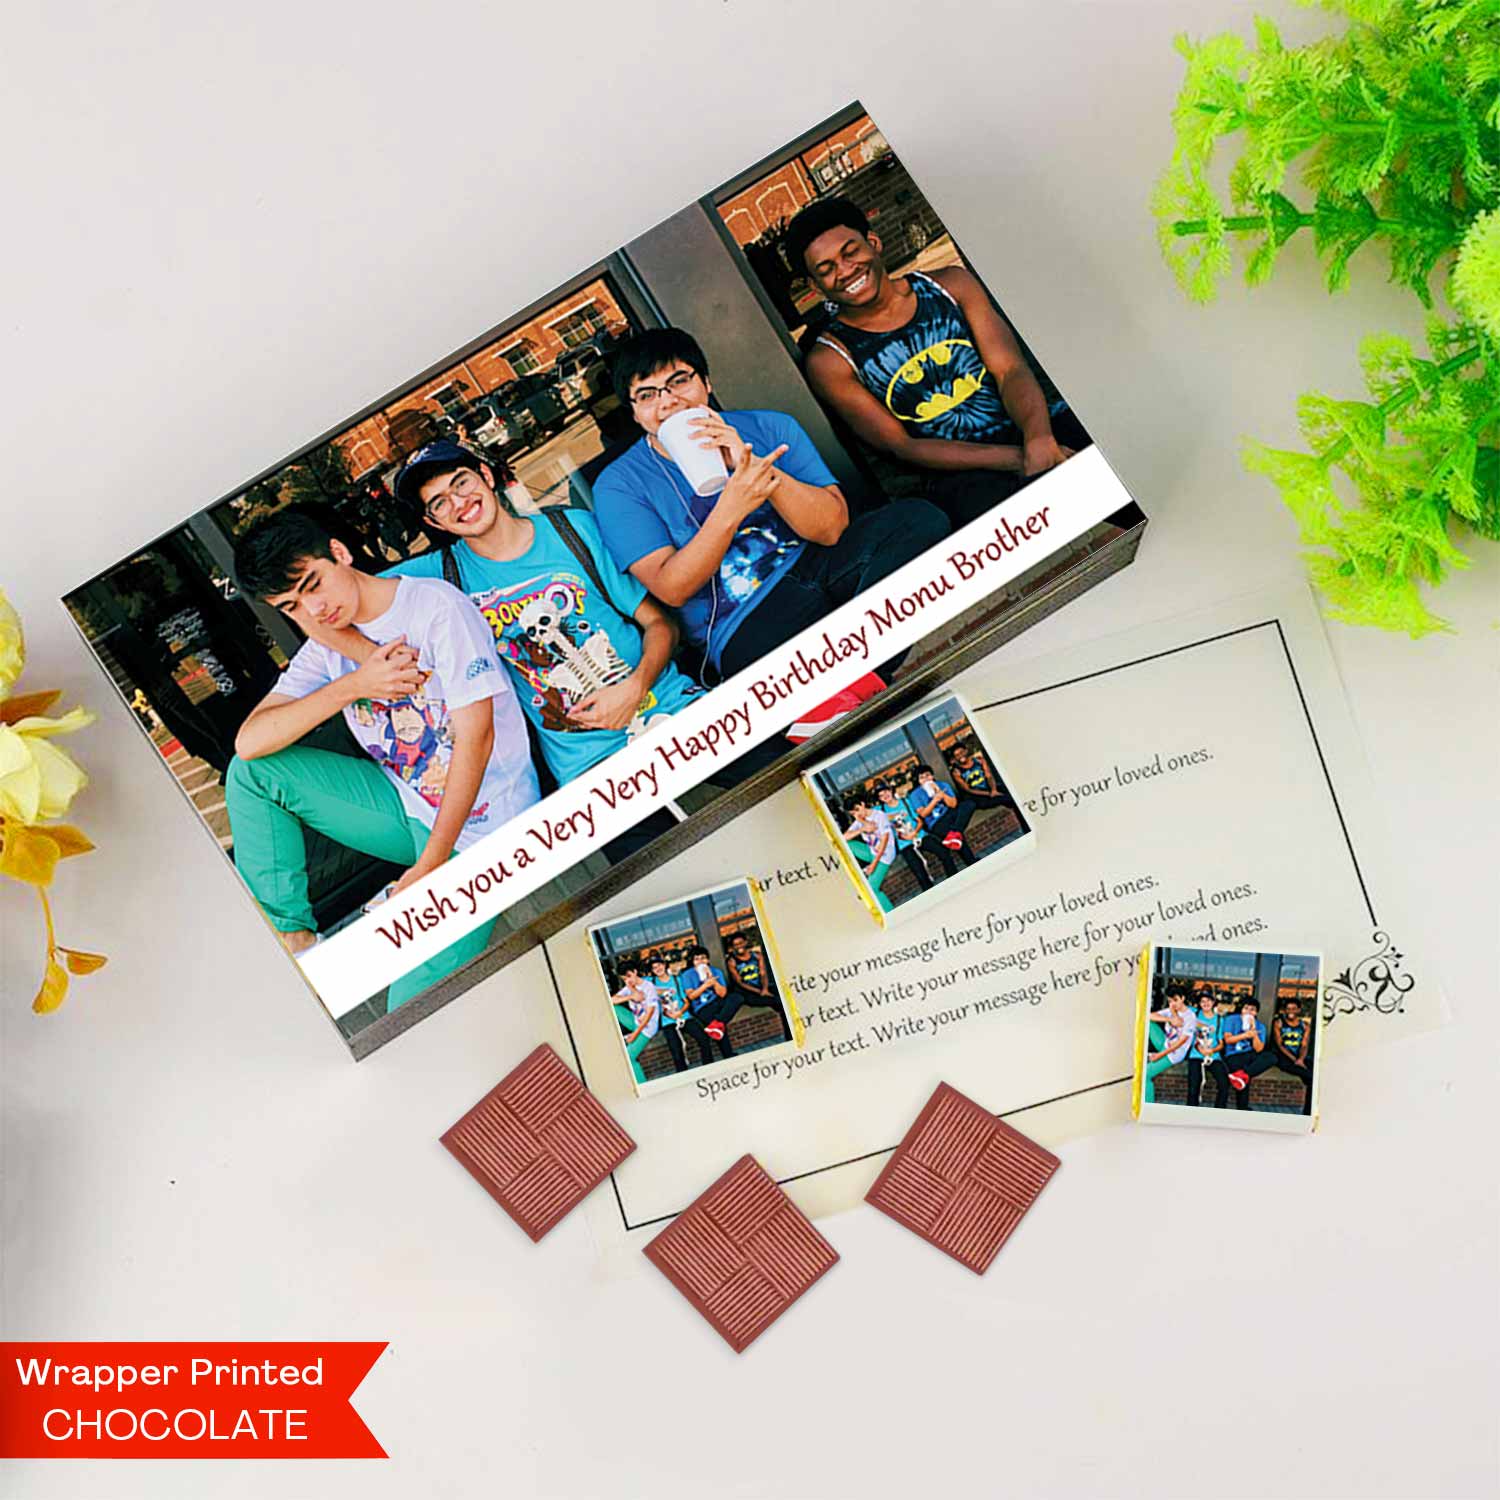 photo printed chocolate photo on chocolate wrappers personalised chocolate corporate gifts personalised chocolates with names personalized chocolate gifts personalised chocolates with photo india personalized chocolate box personalised chocolates for birthdays